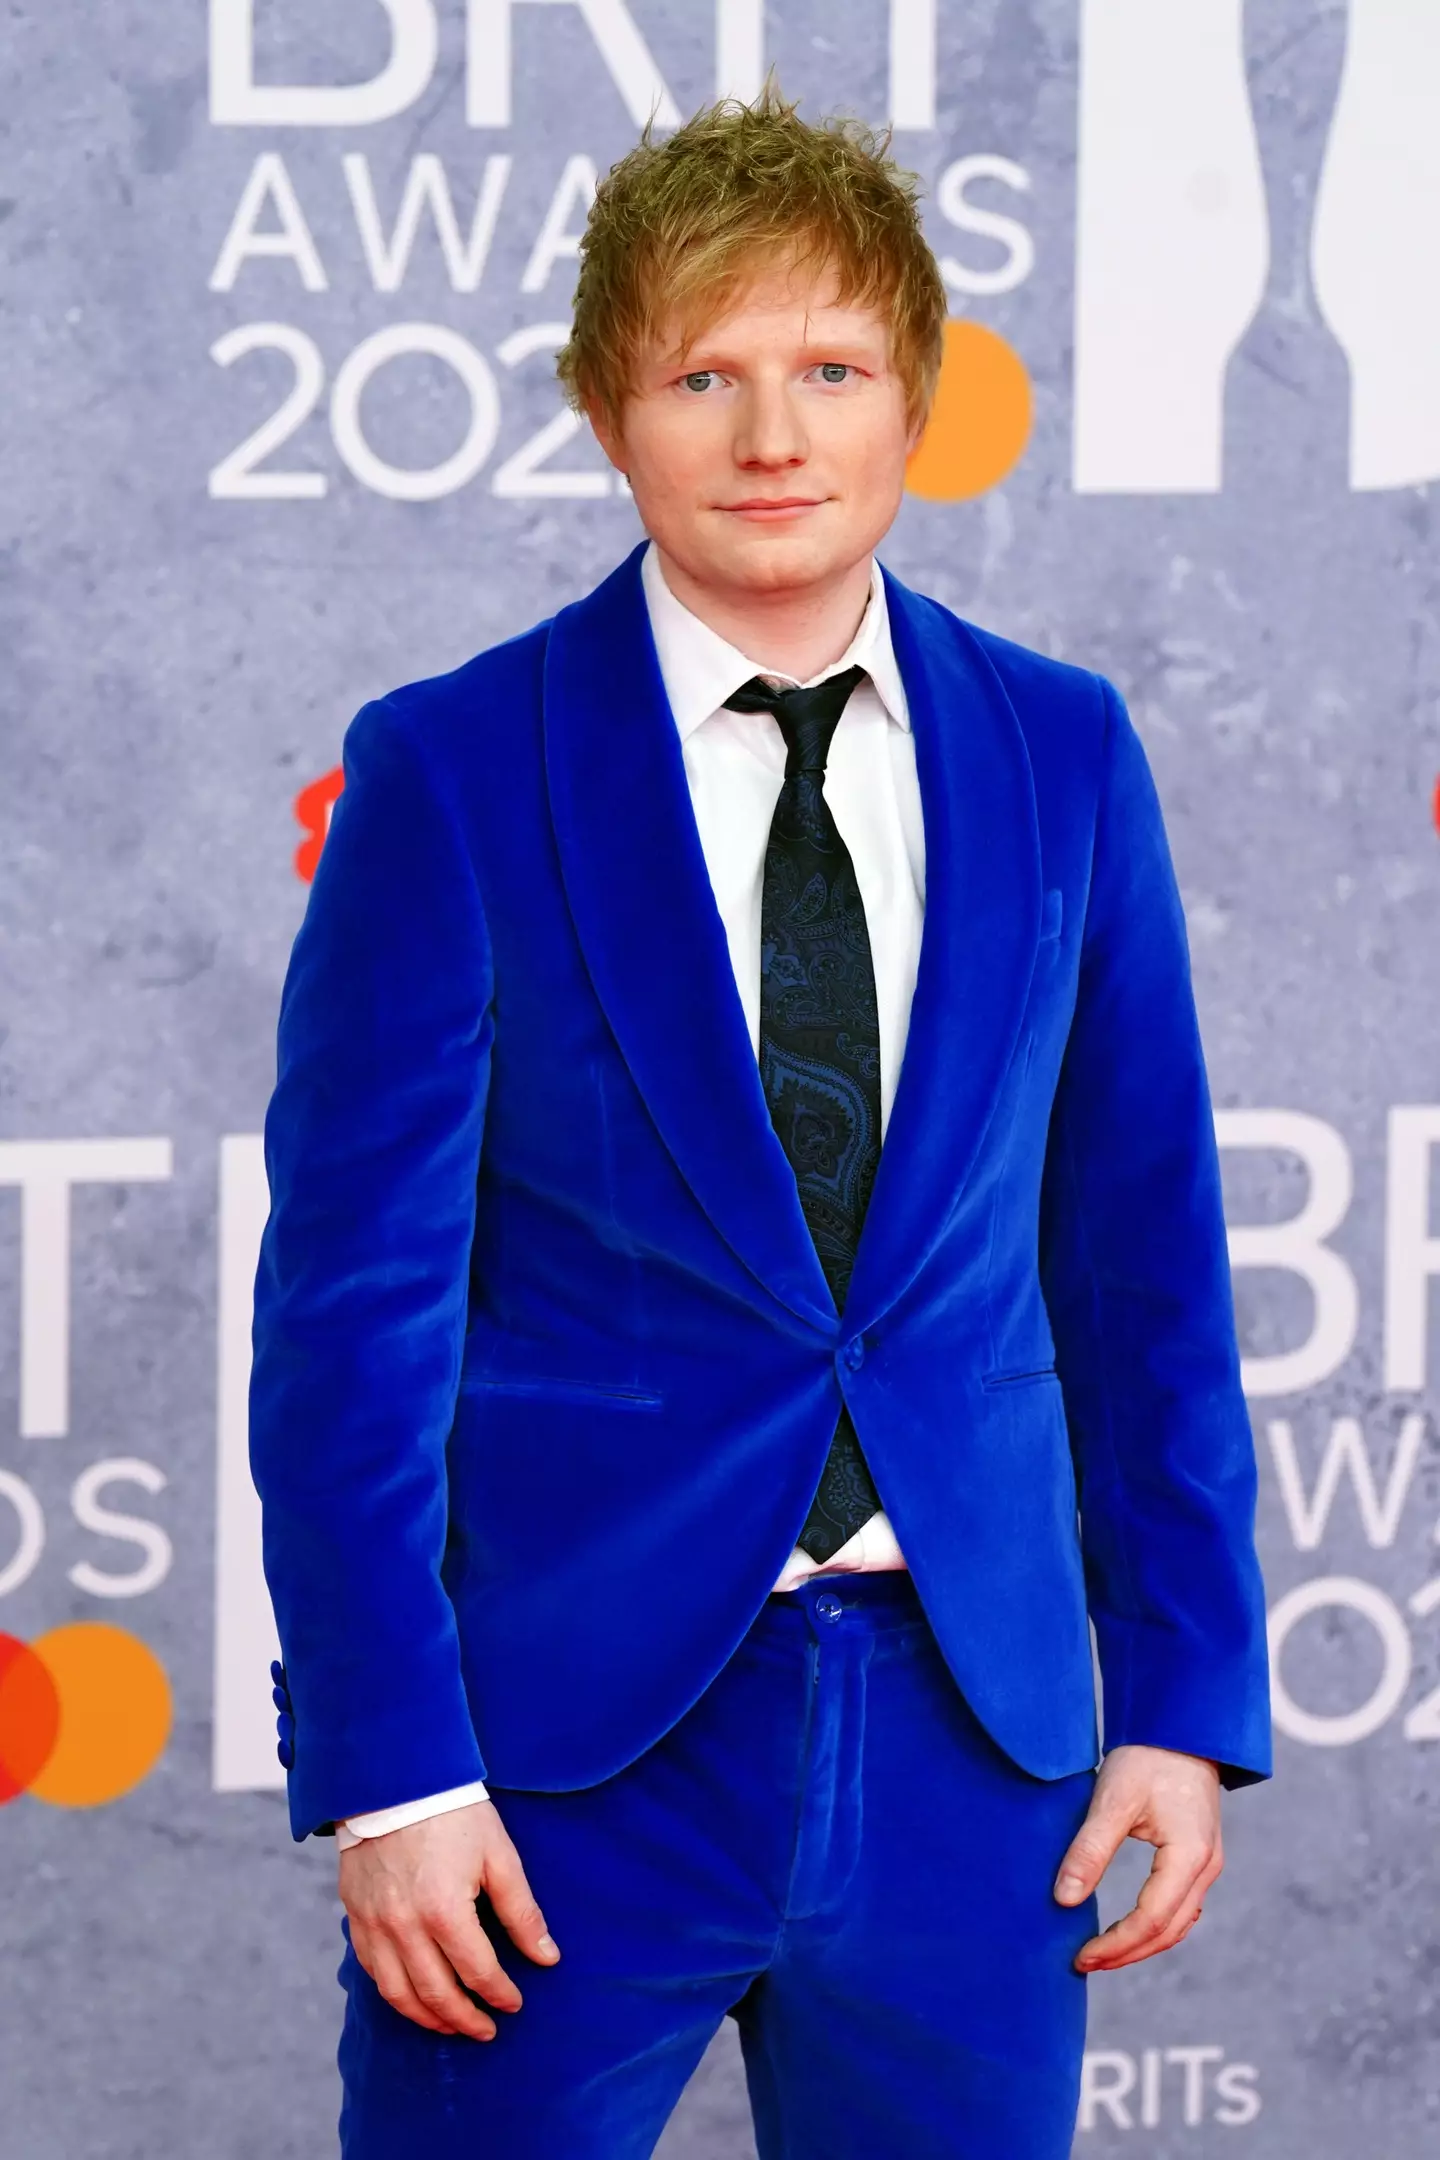 The real Ed suited and booted at the Brits.